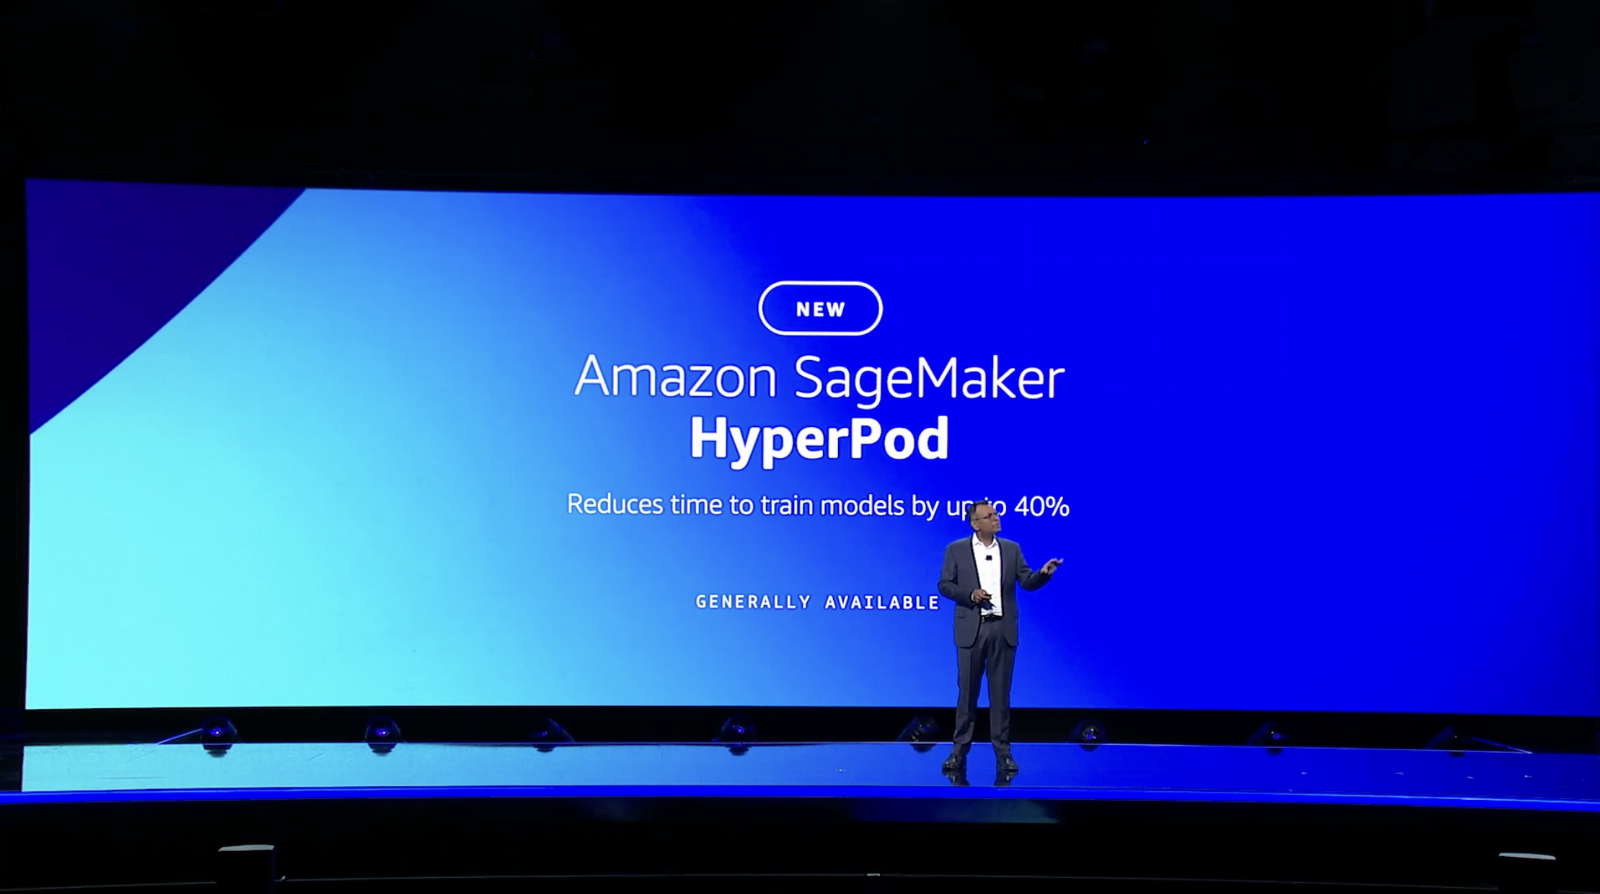 Amazon SageMaker HyperPod makes it easier to train and fine-tune LLMs